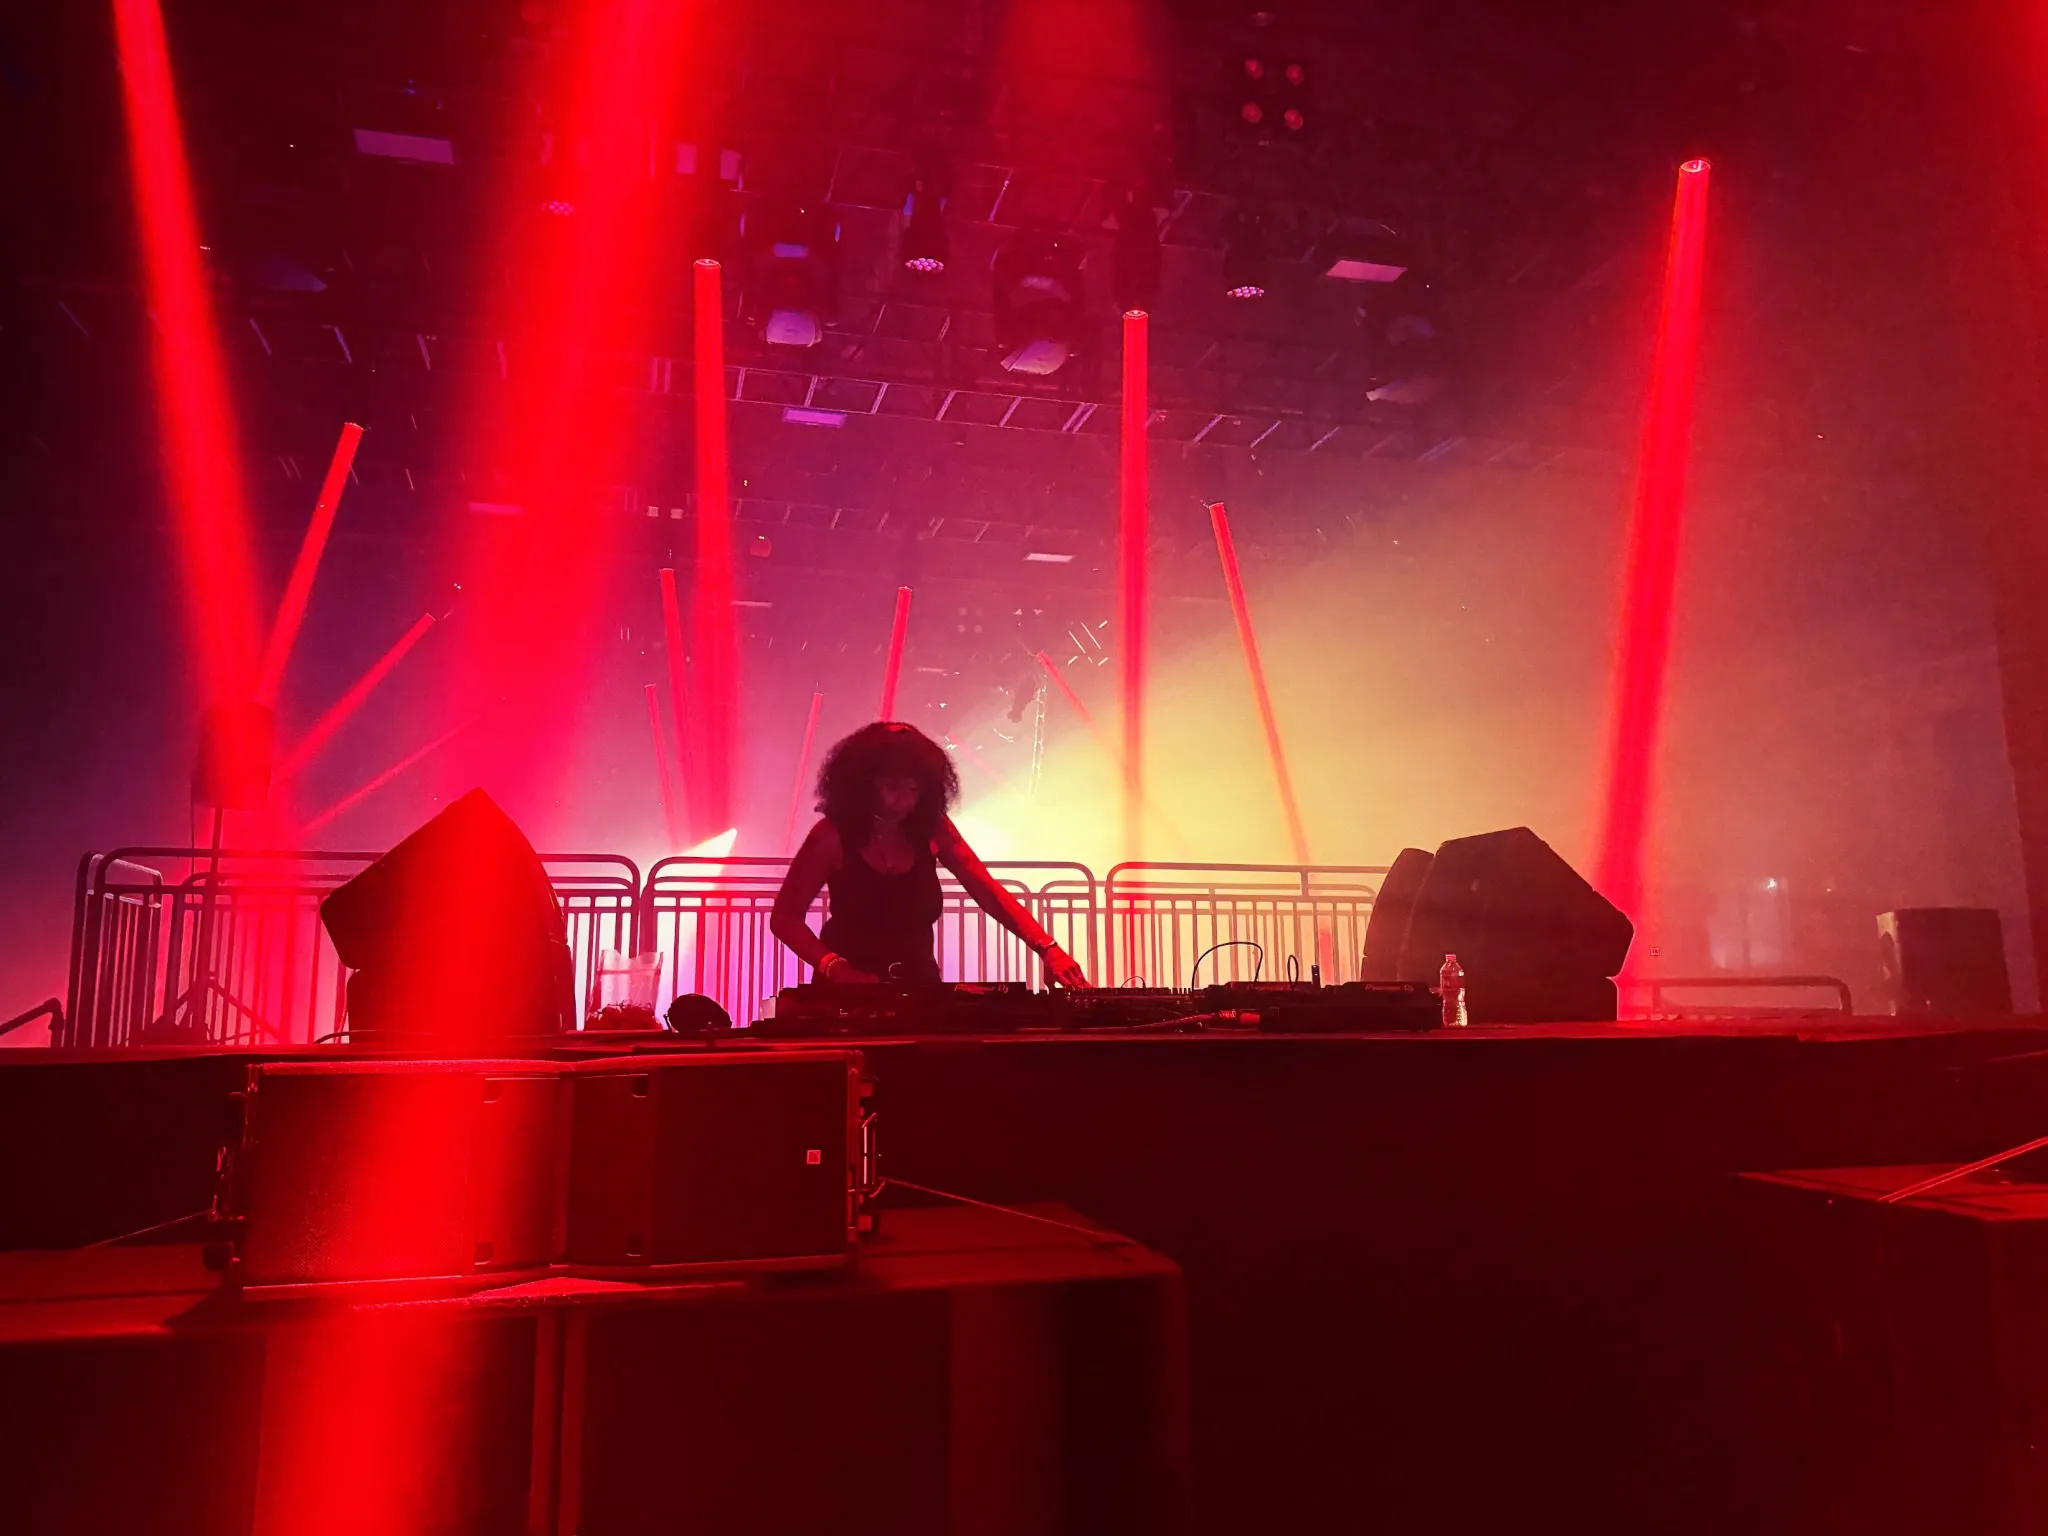 DJ Minx, a legendary artist out of Detroit spins house tracks while backlit by flood lights and lasers in front of a crowd